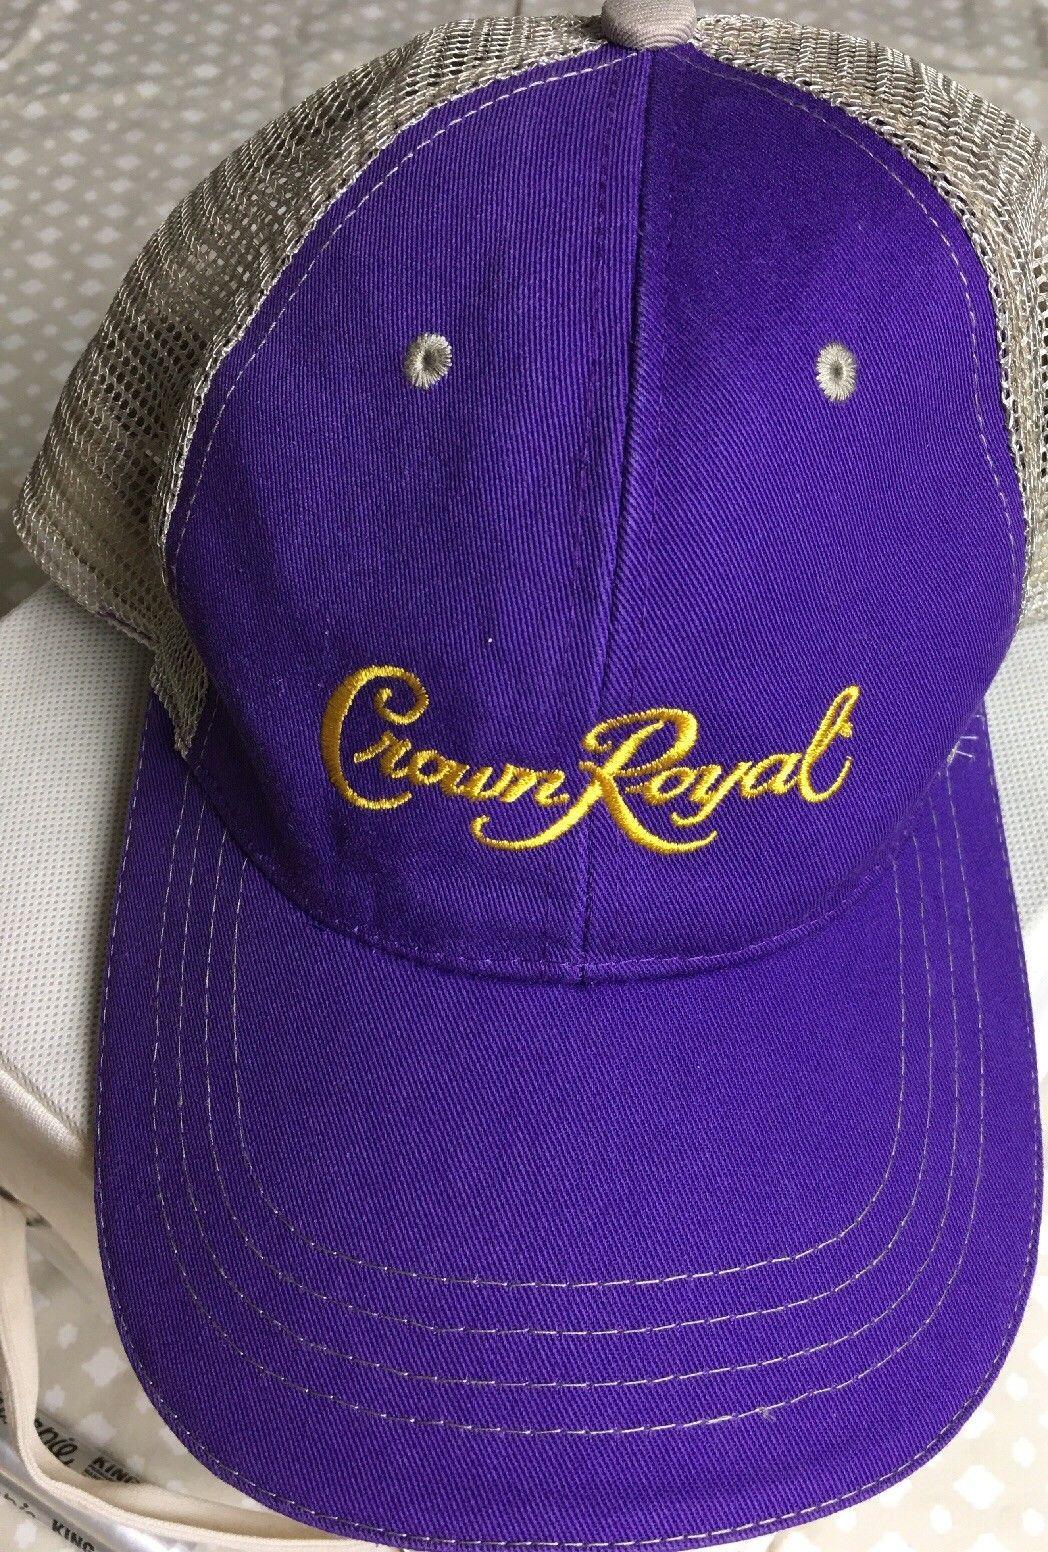 Purple and Gold Crown Logo - Crown Royal Canadian Whiskey Purple Cap Hat Gold Logo Adjustable ...